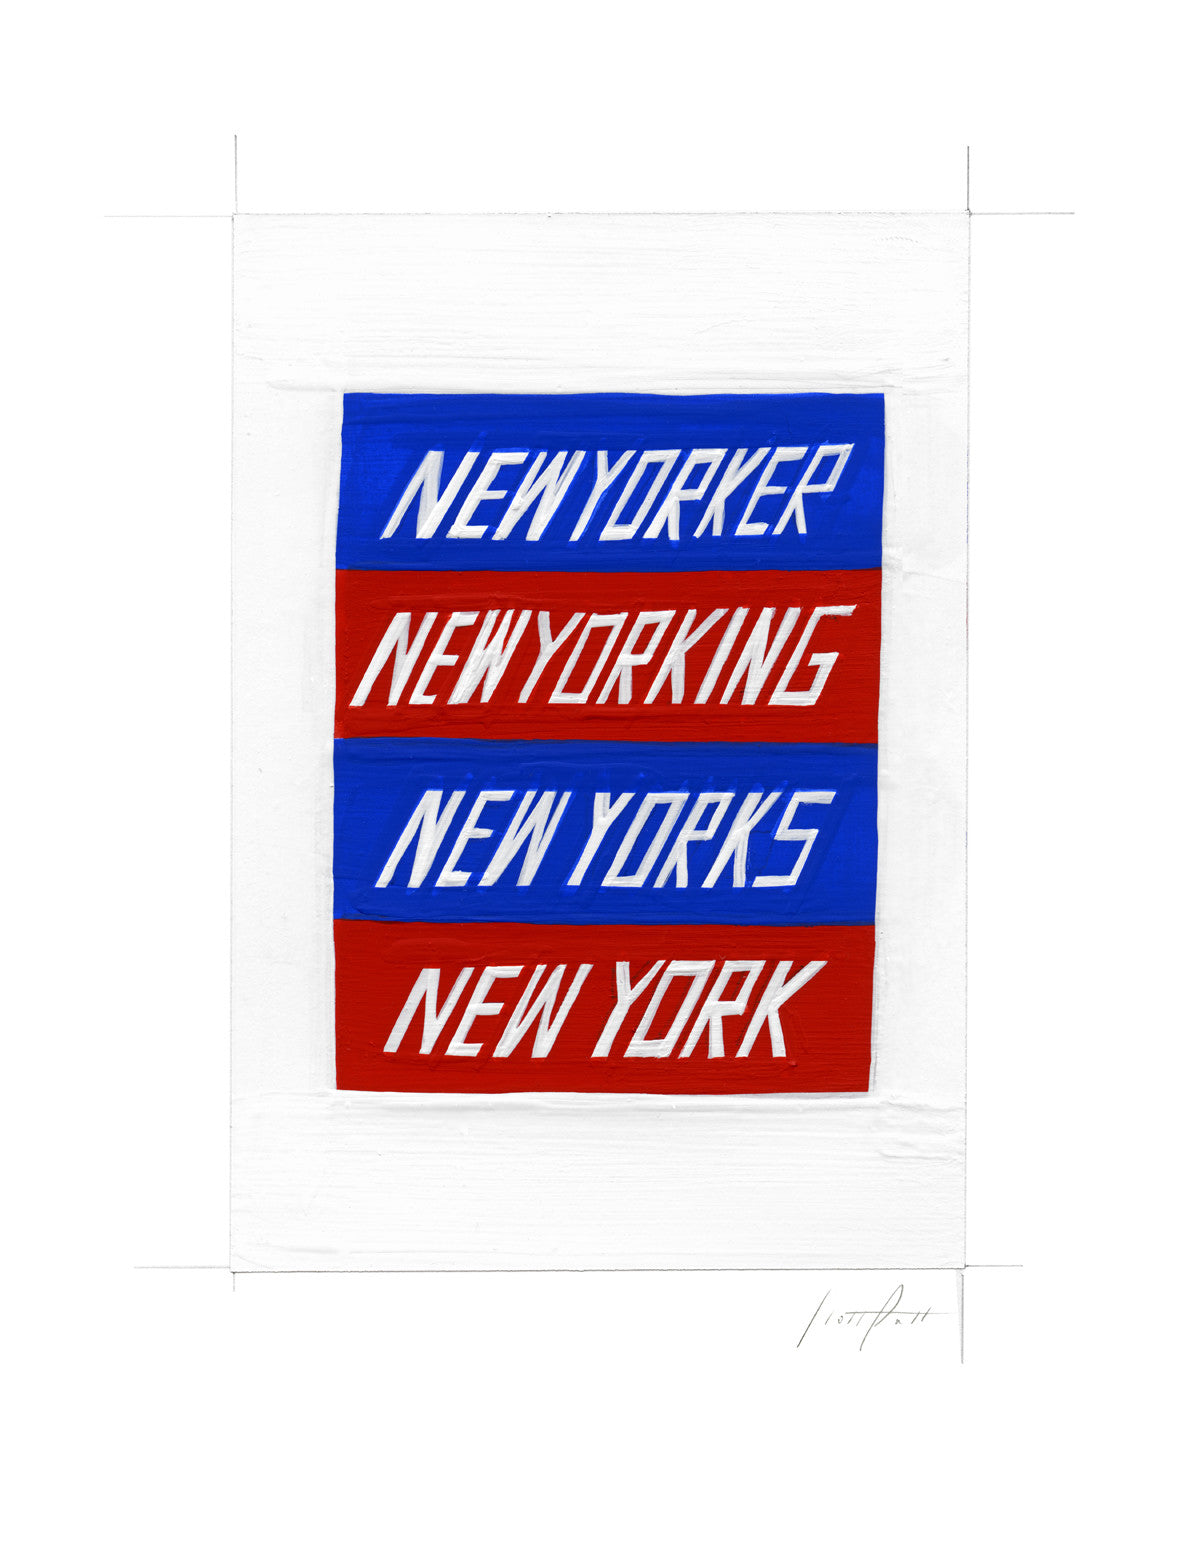 #256 NEW YORKING (BLUE AND RED)